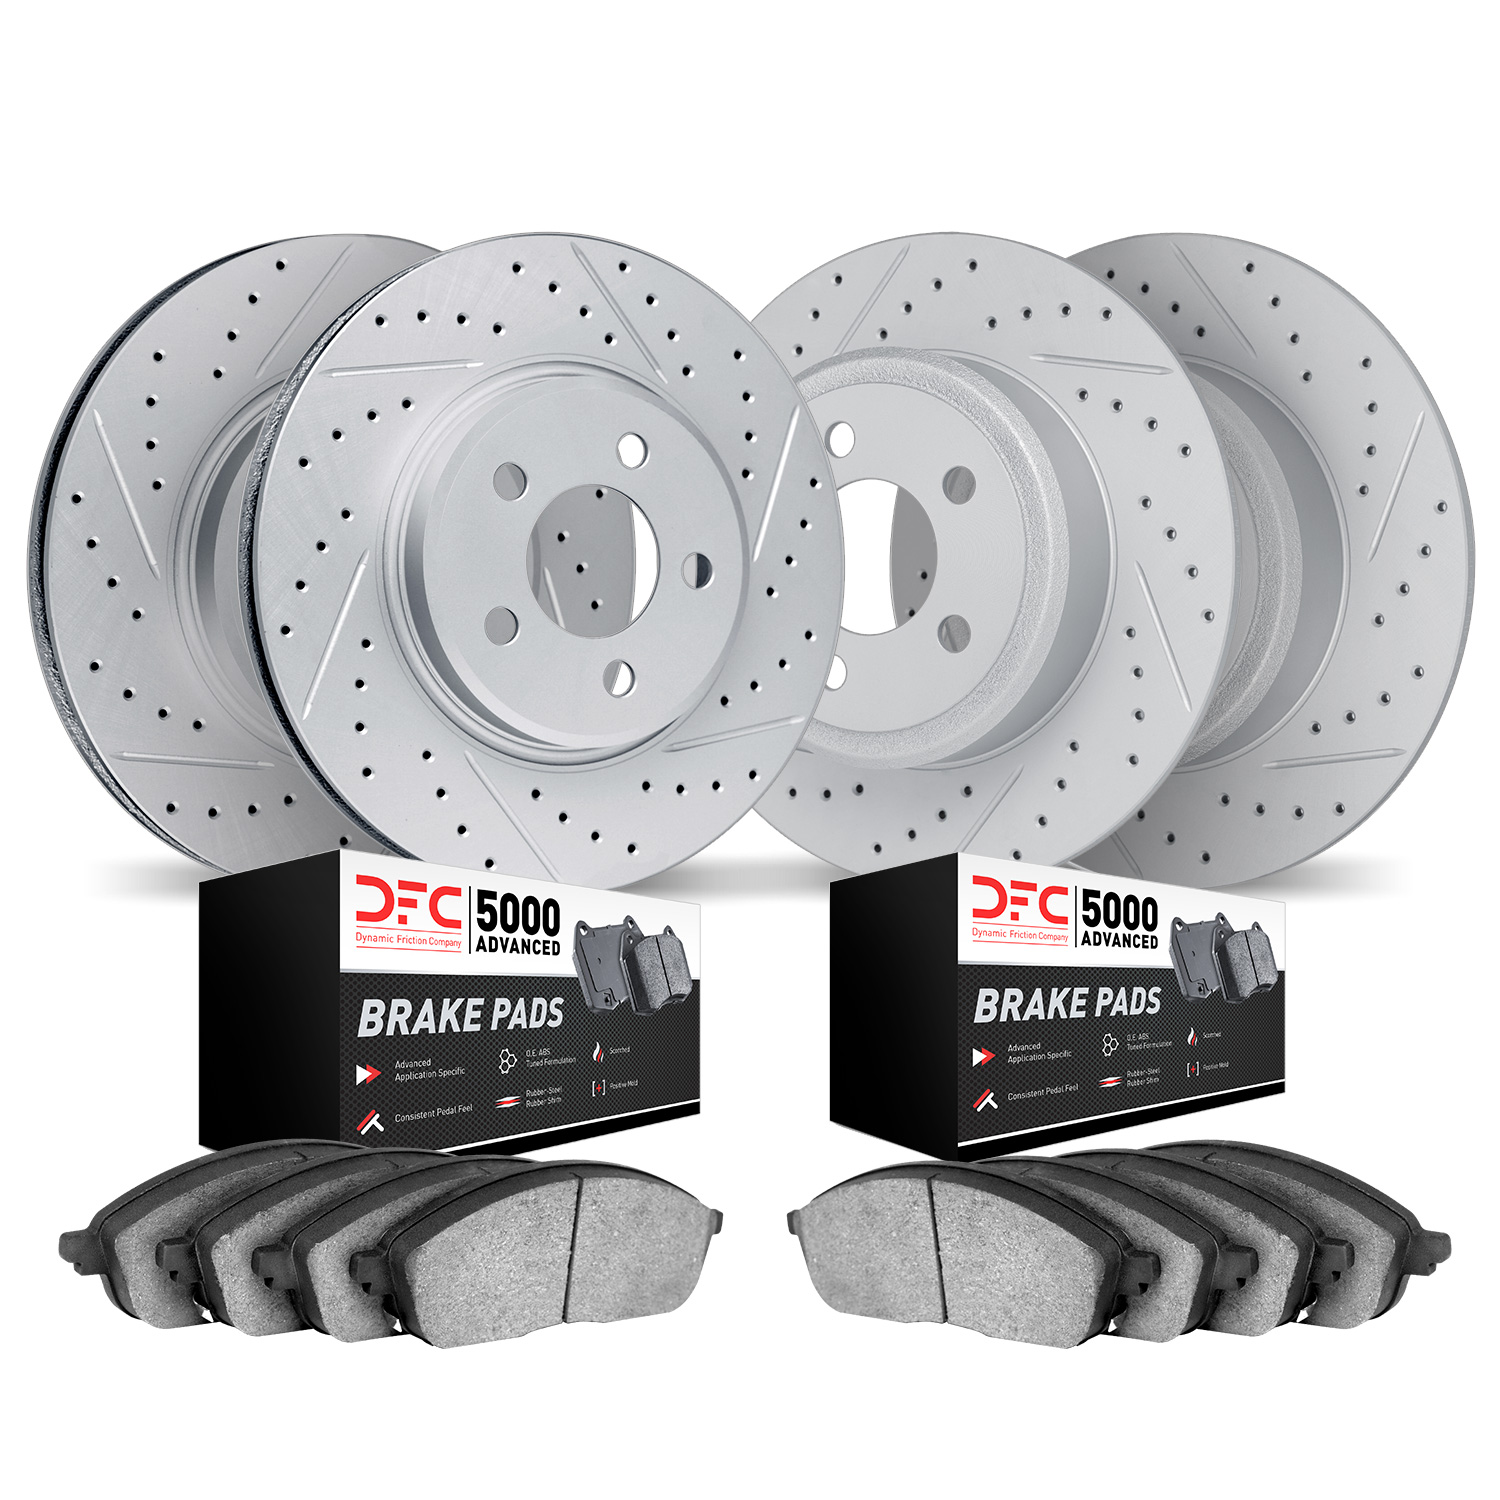 2504-42072 Geoperformance Drilled/Slotted Rotors w/5000 Advanced Brake Pads Kit, 1999-2004 Mopar, Position: Front and Rear